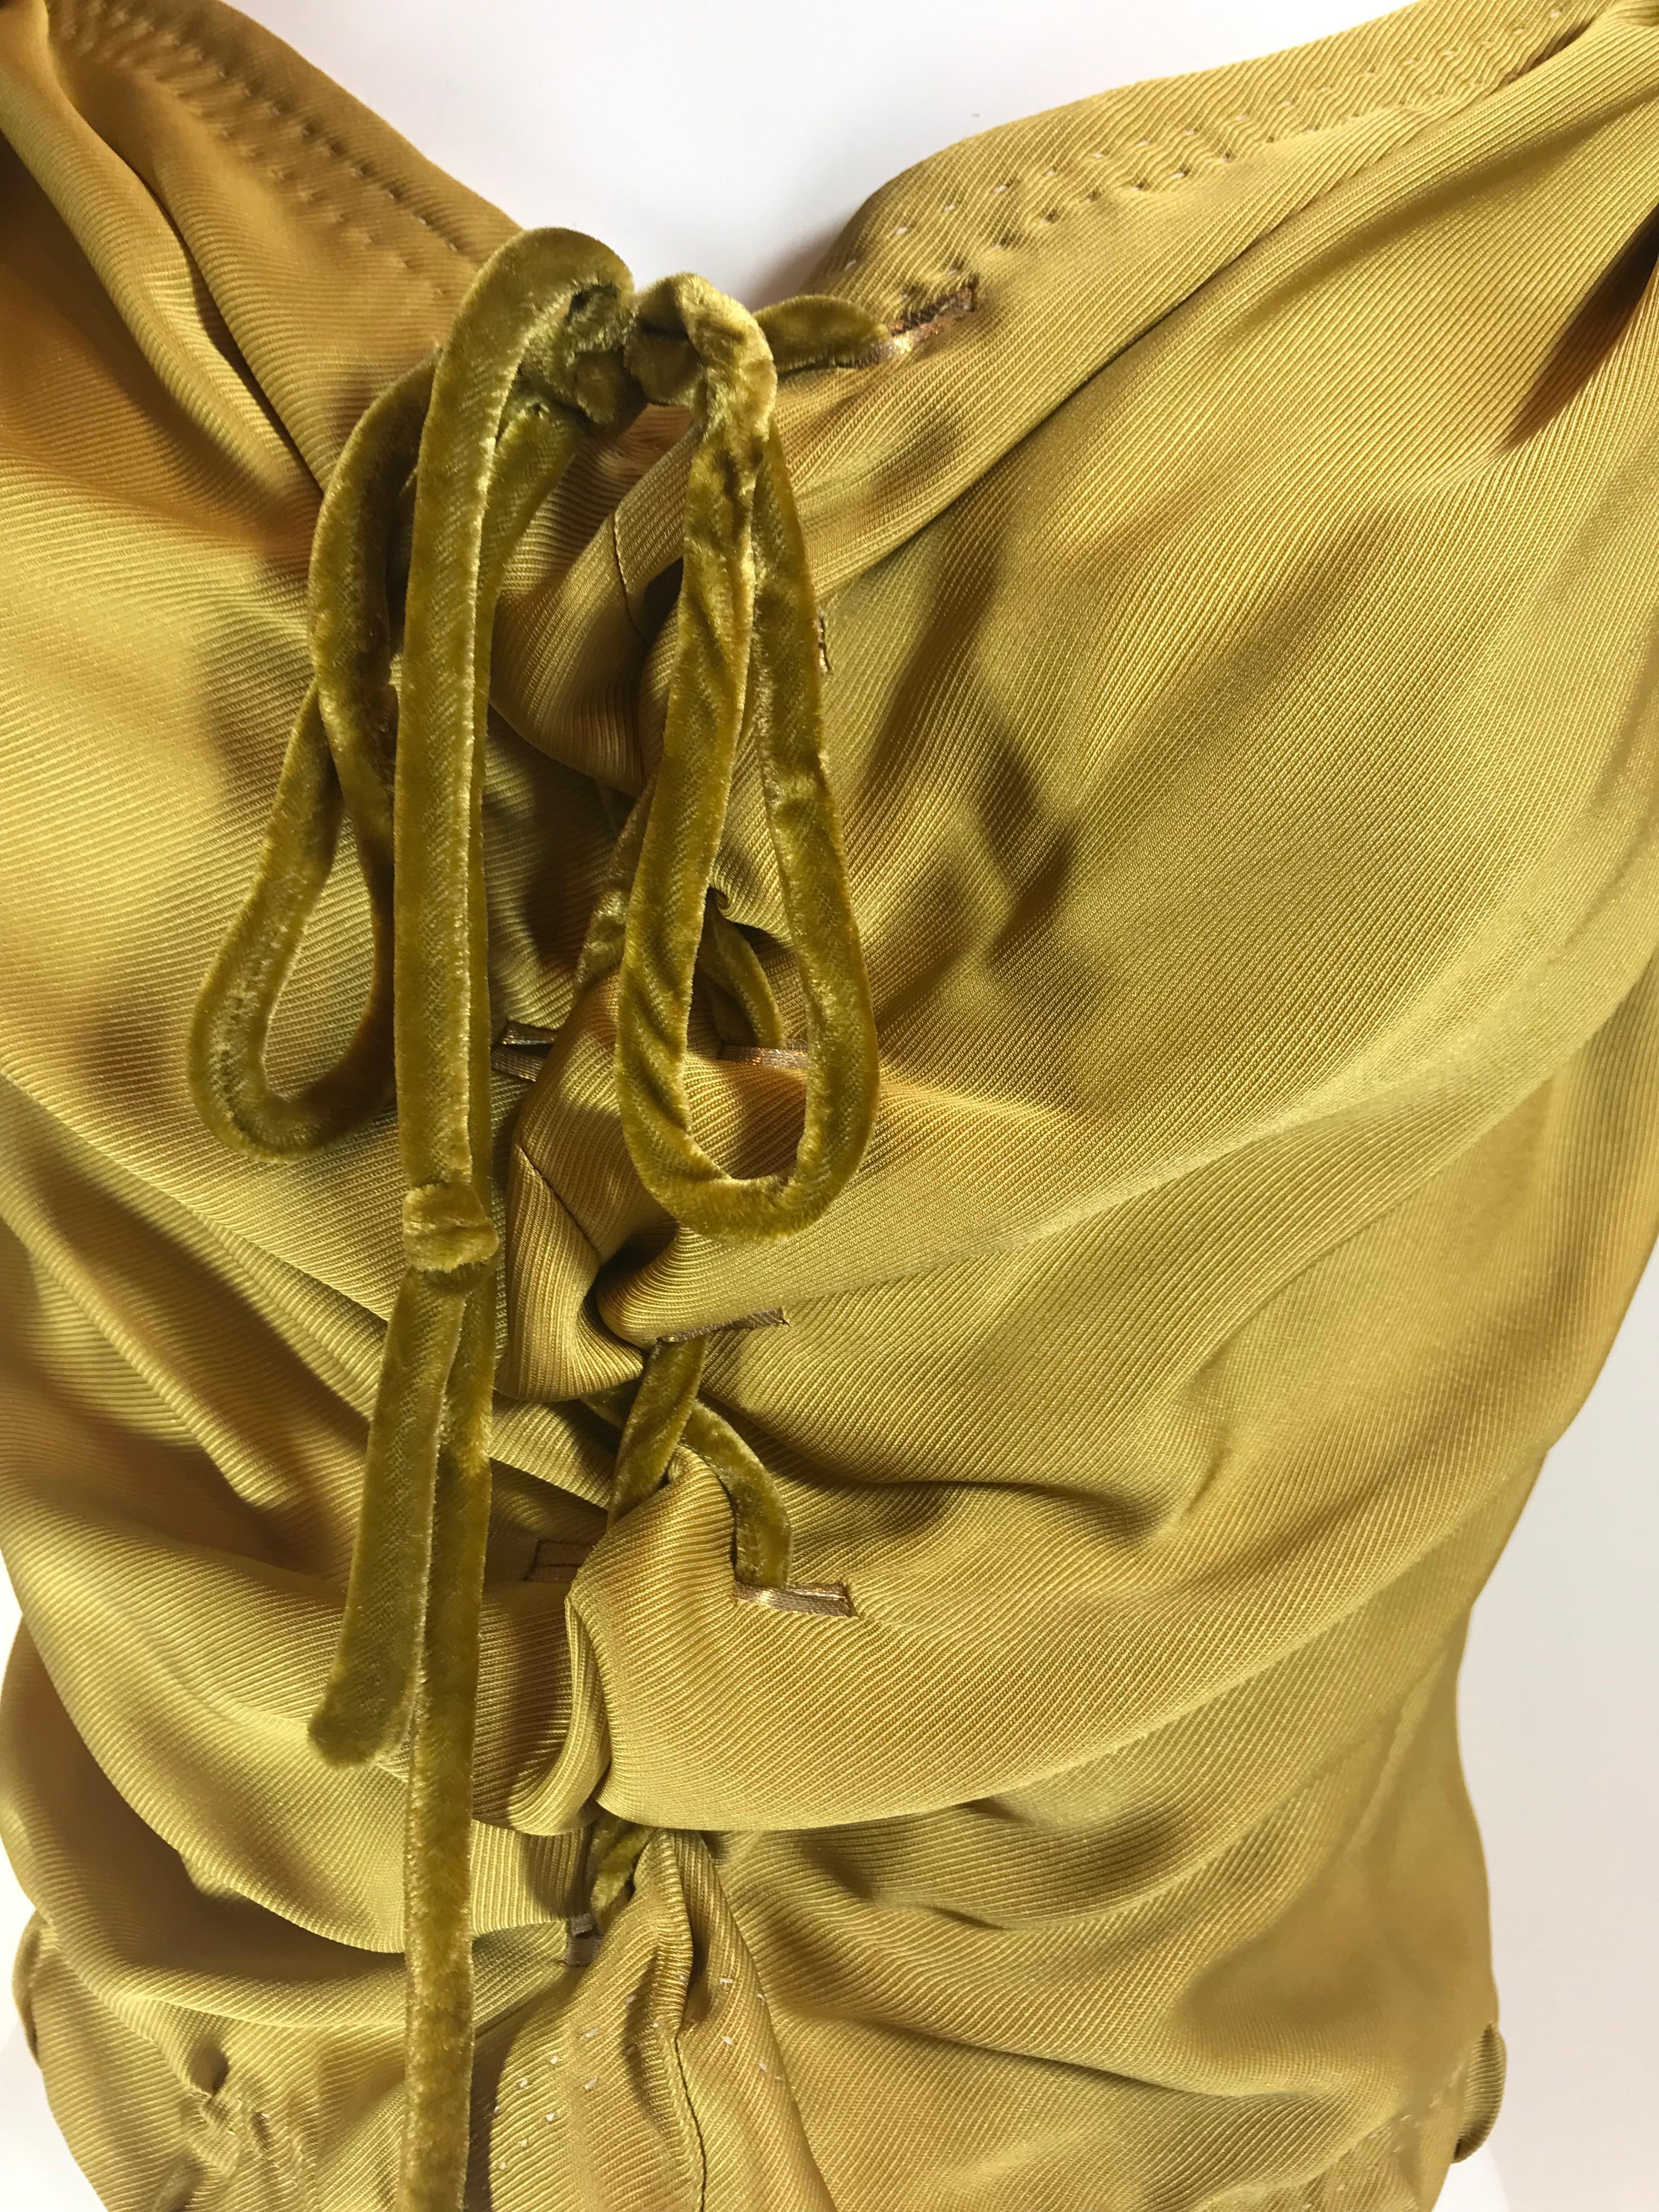 Mustard sleeveless top with V-neck featuring velvet tie accents at front, and zip closure at back. Size can be slightly loosened or tightened. (Measured with slightly tied.)